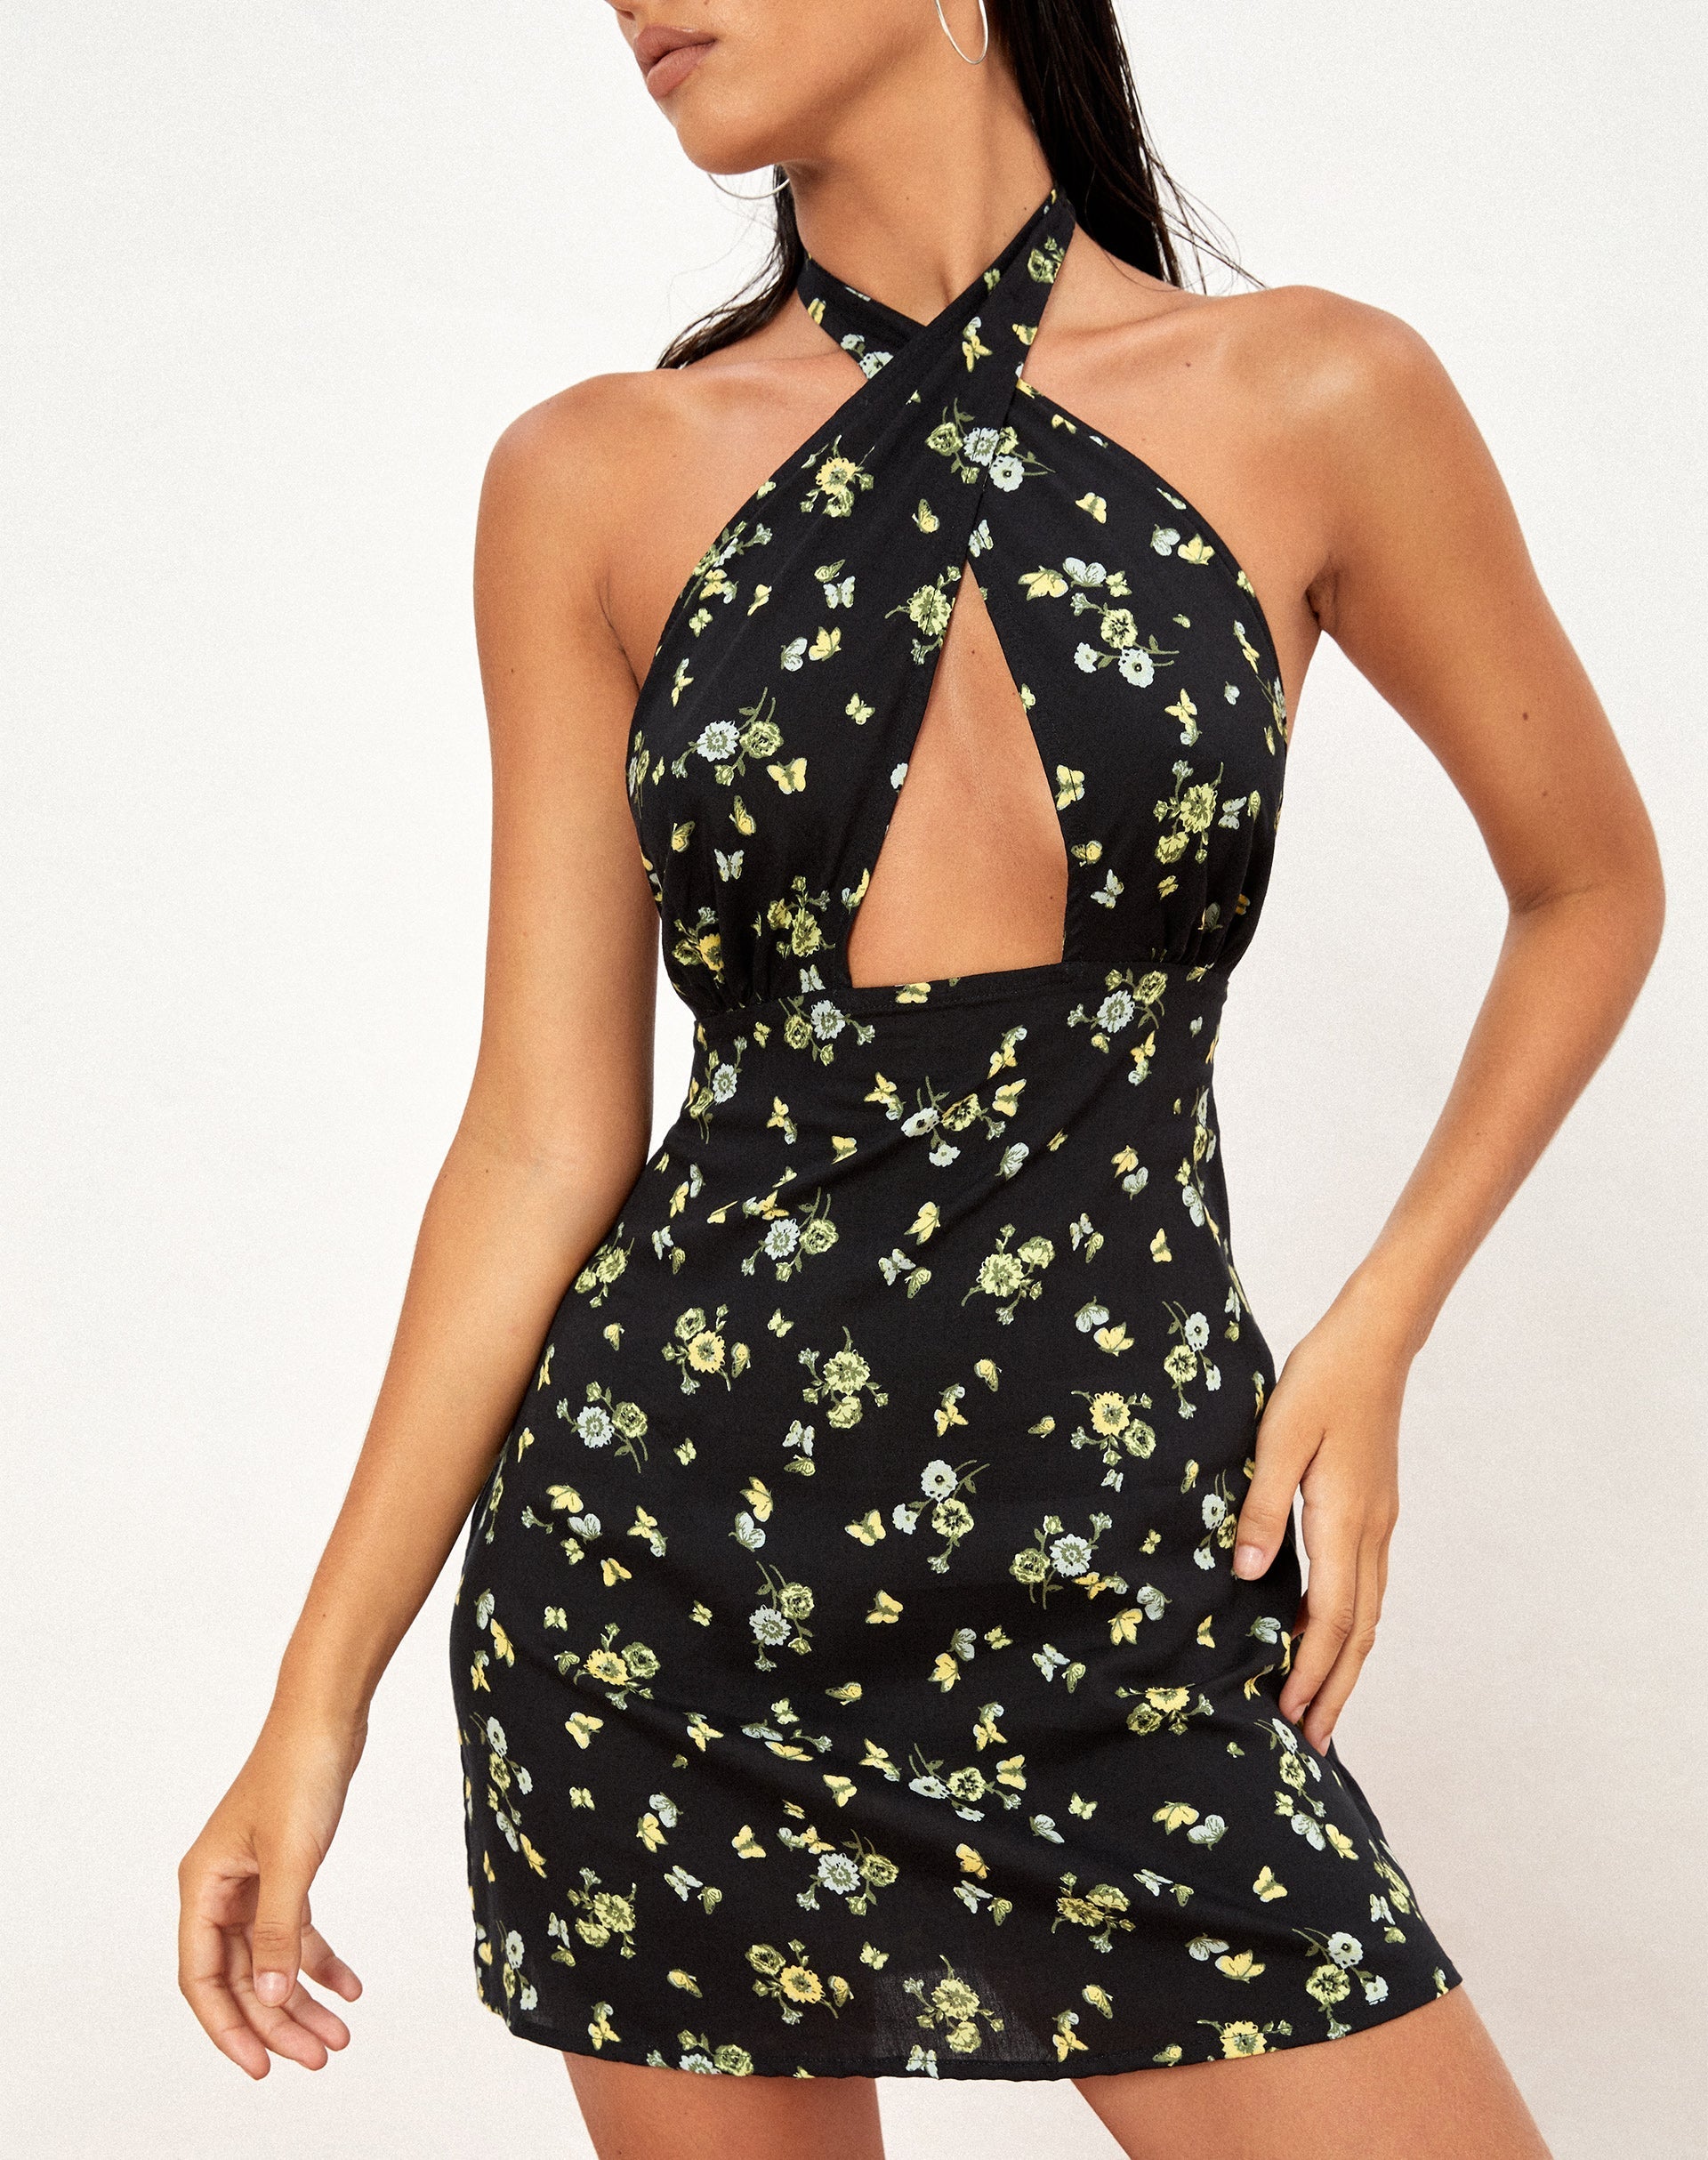 Moura Cutout Dress in Lemon and Lime Black